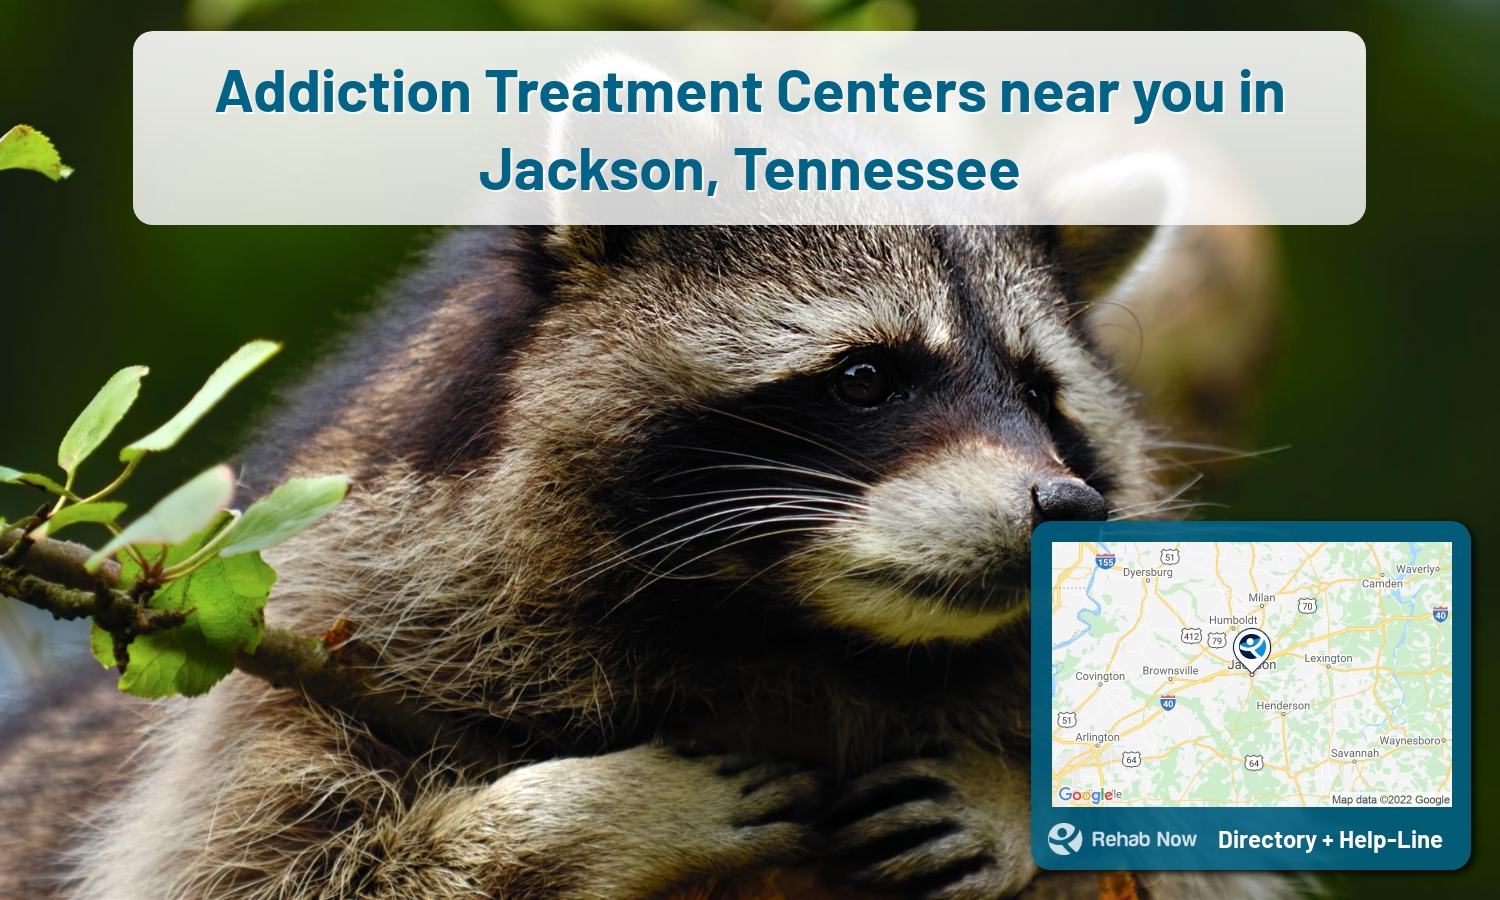 Jackson, TN Treatment Centers. Find drug rehab in Jackson, Tennessee, or detox and treatment programs. Get the right help now!